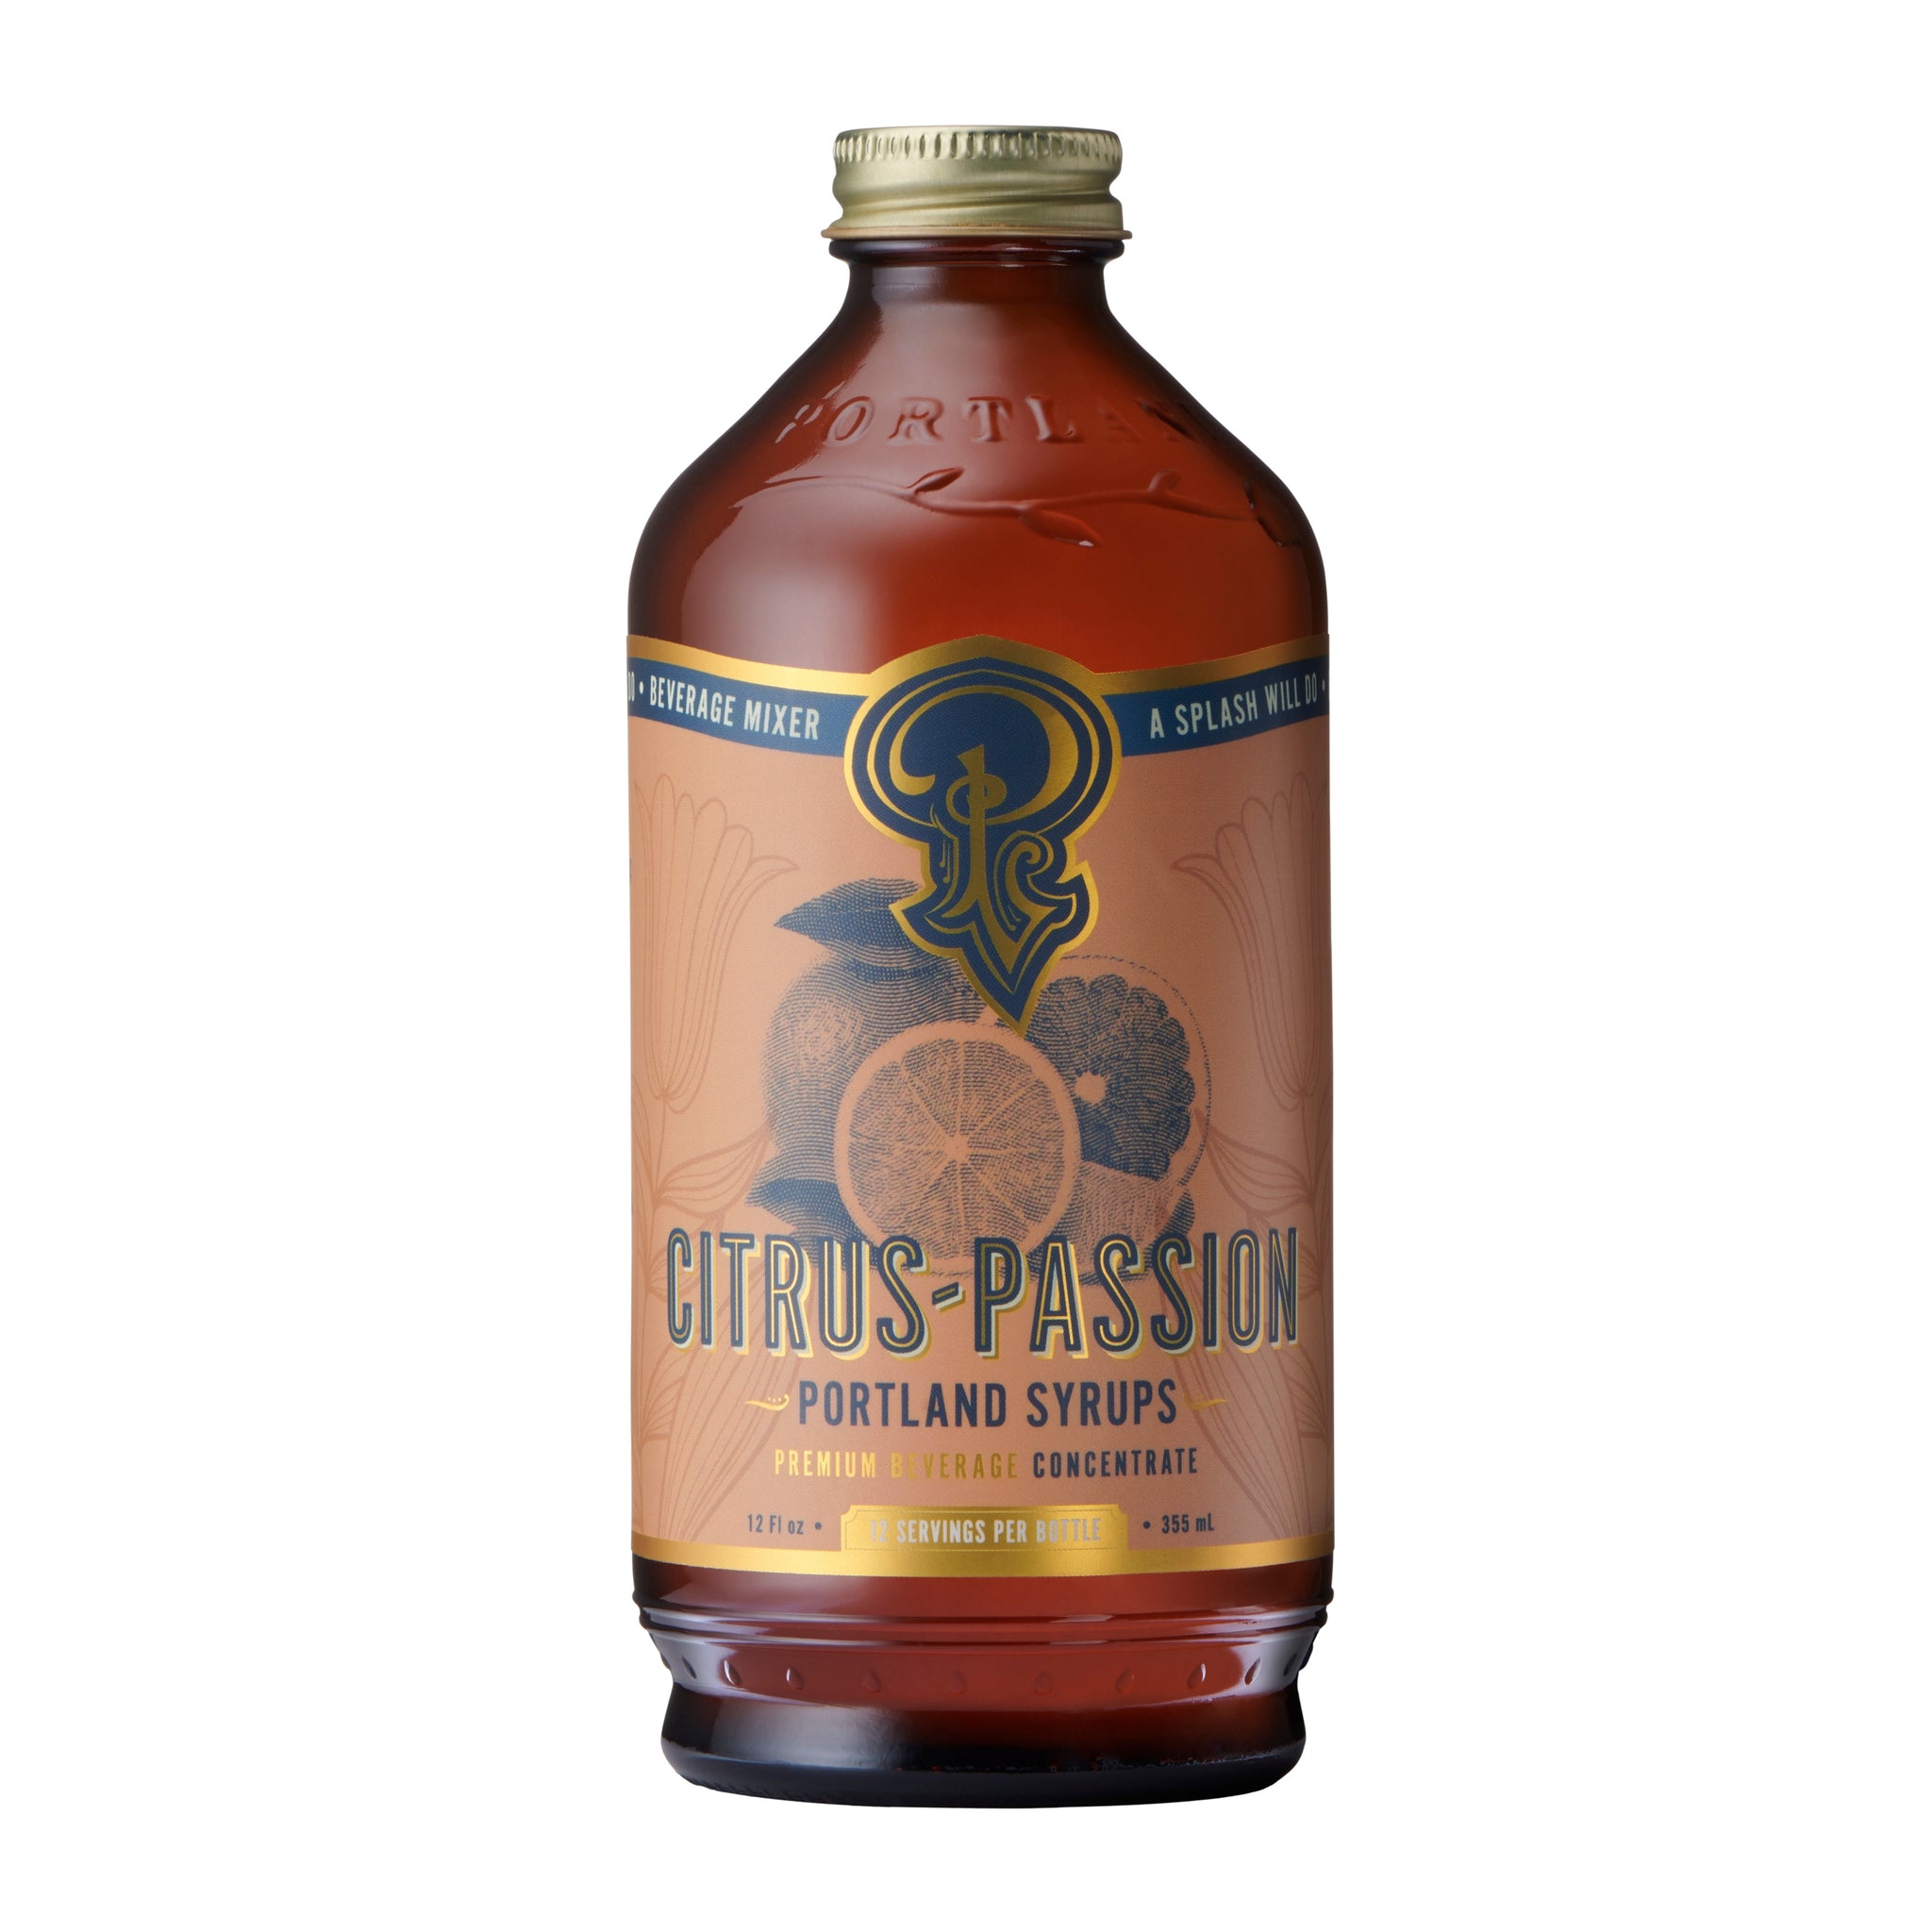 Portland Syrups | Citrus Passion Fruit Syrup